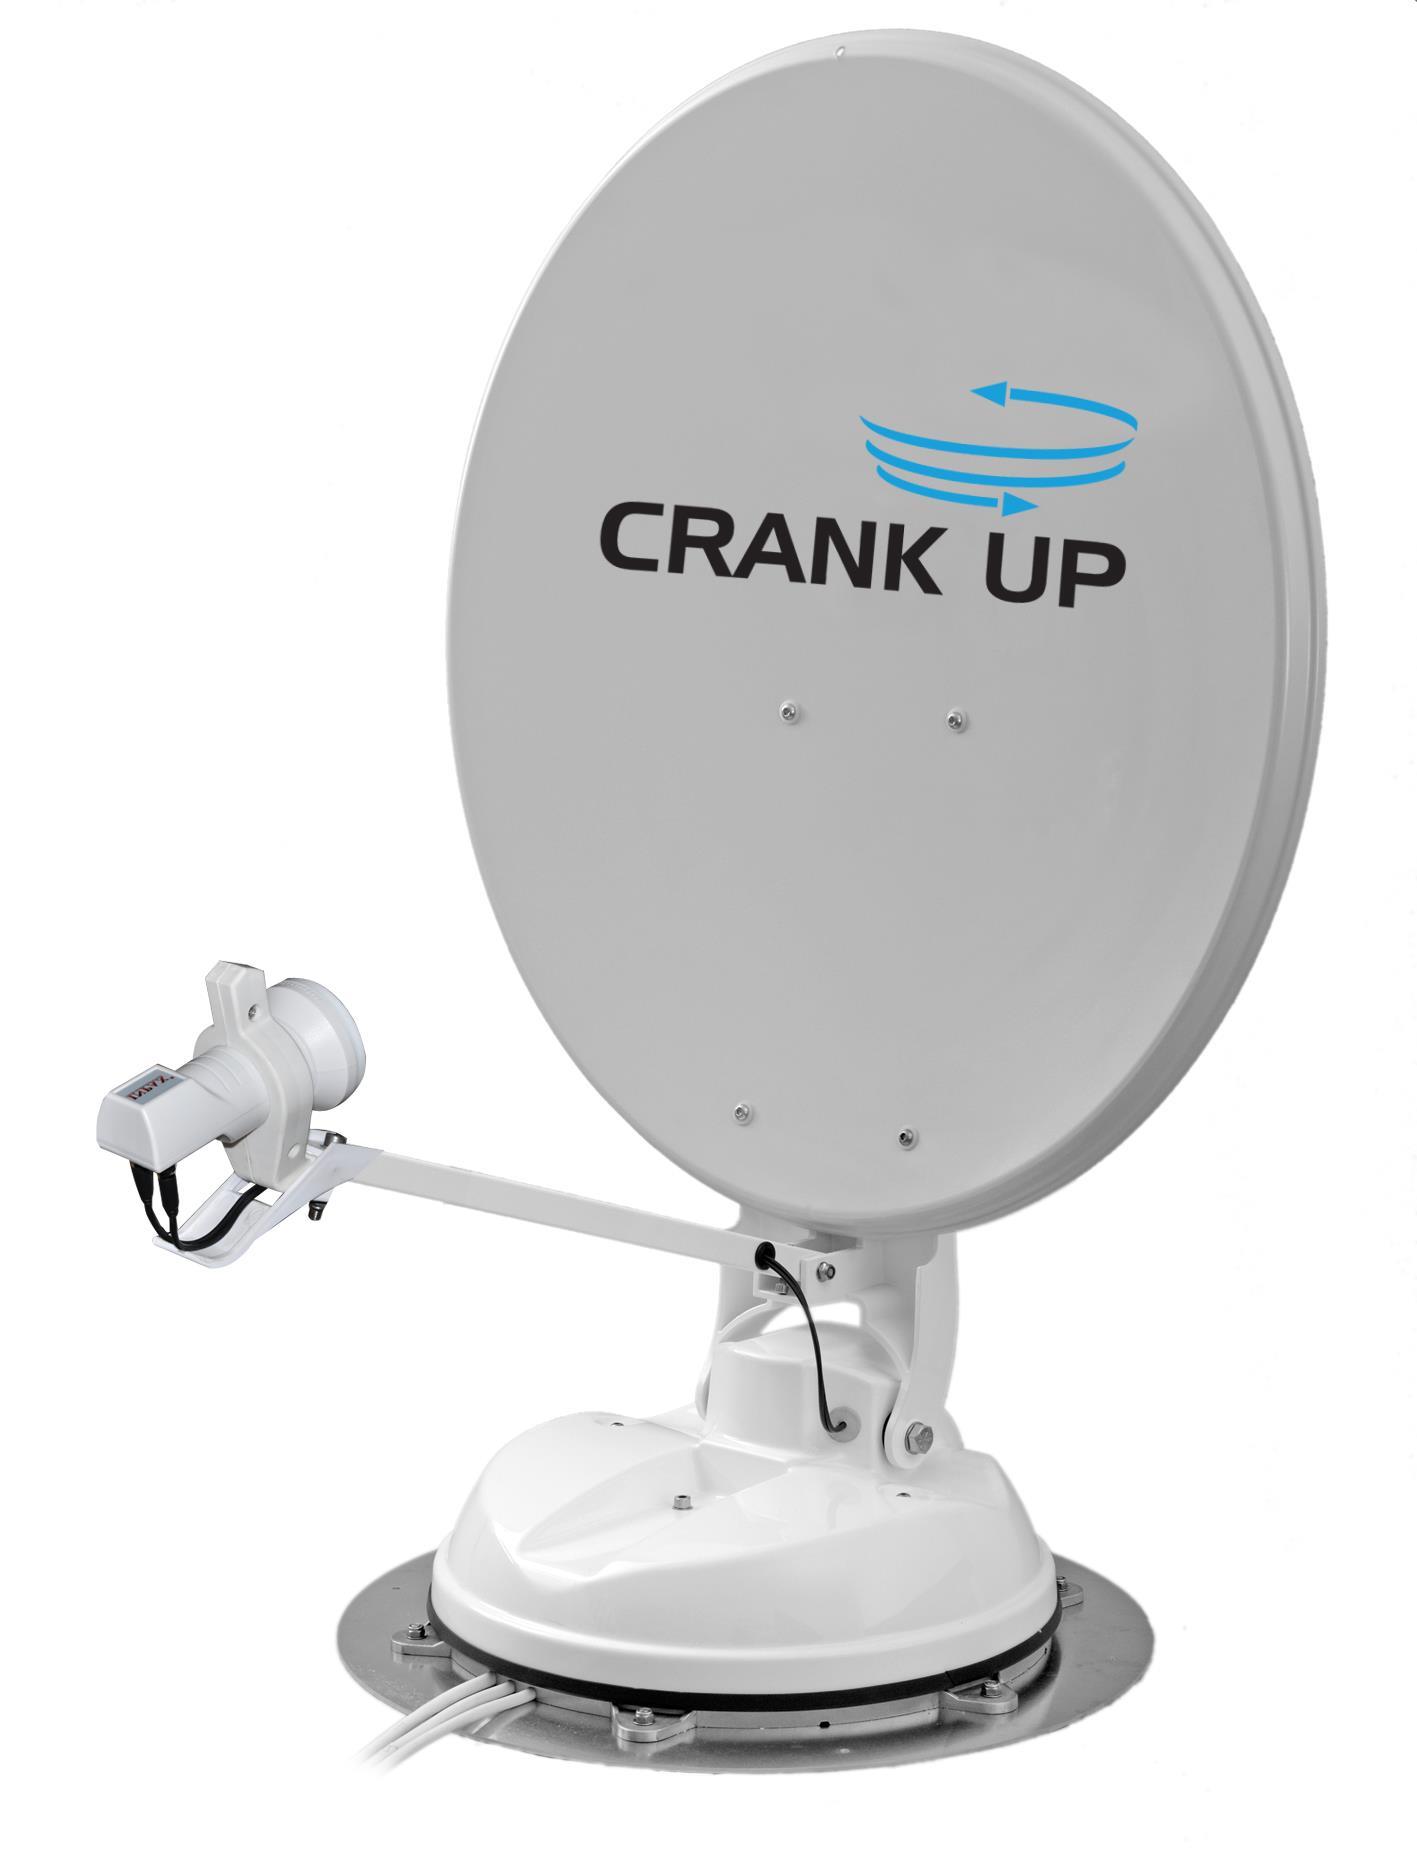  The maxview crank-up-satellite-system”.